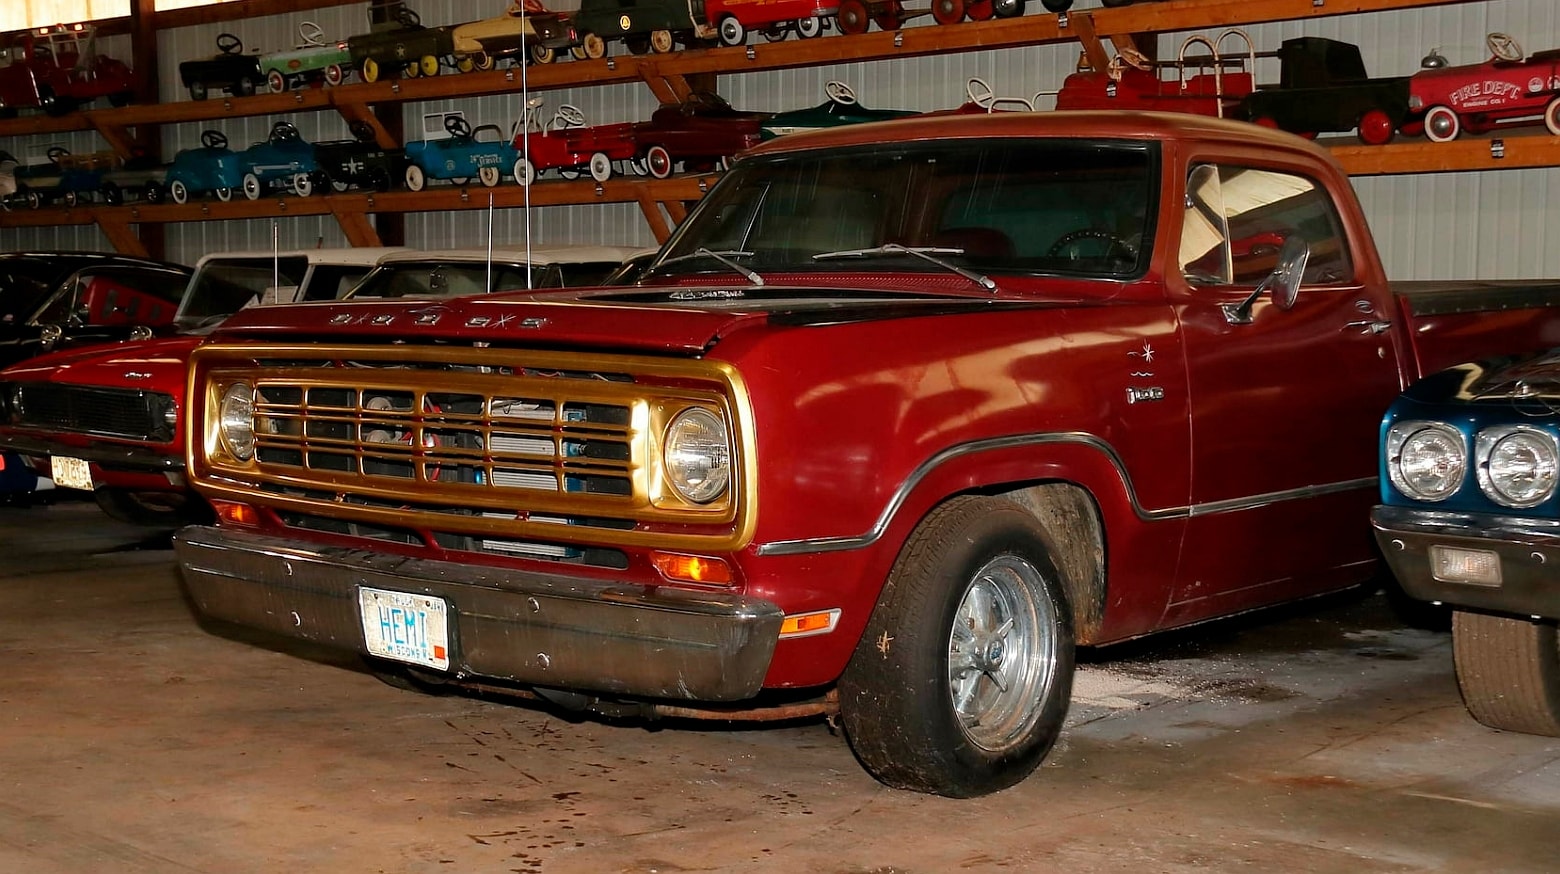 Chopped 1975 Dodge Truck Spent Years in Storage, Hides Under the Hood - autoevolution